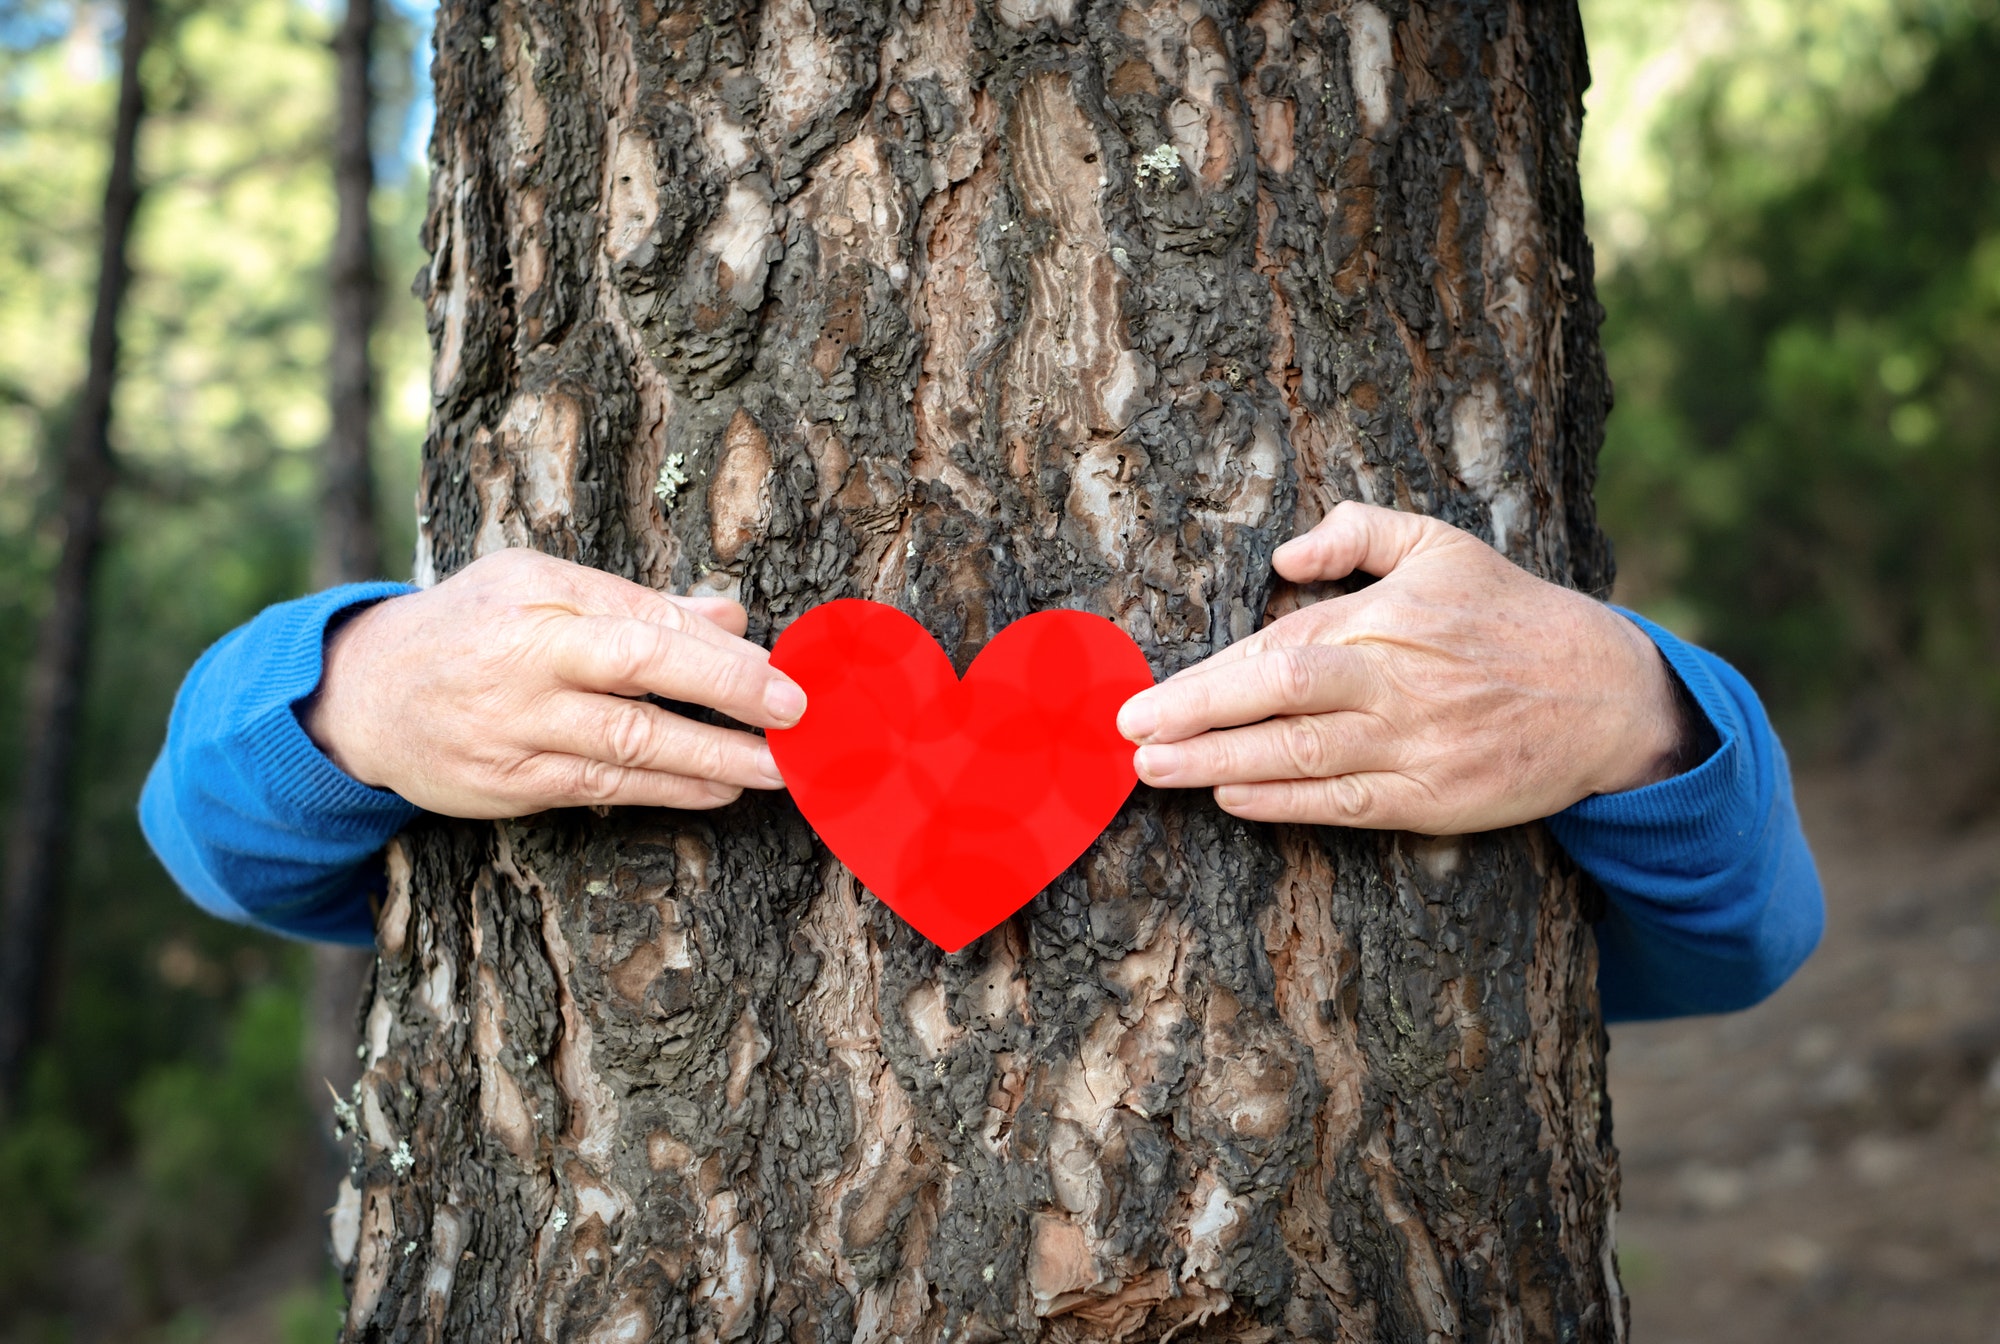 Male human arms embracing a tree trunk in the forest,holding heart shaped paper. Save planet concept